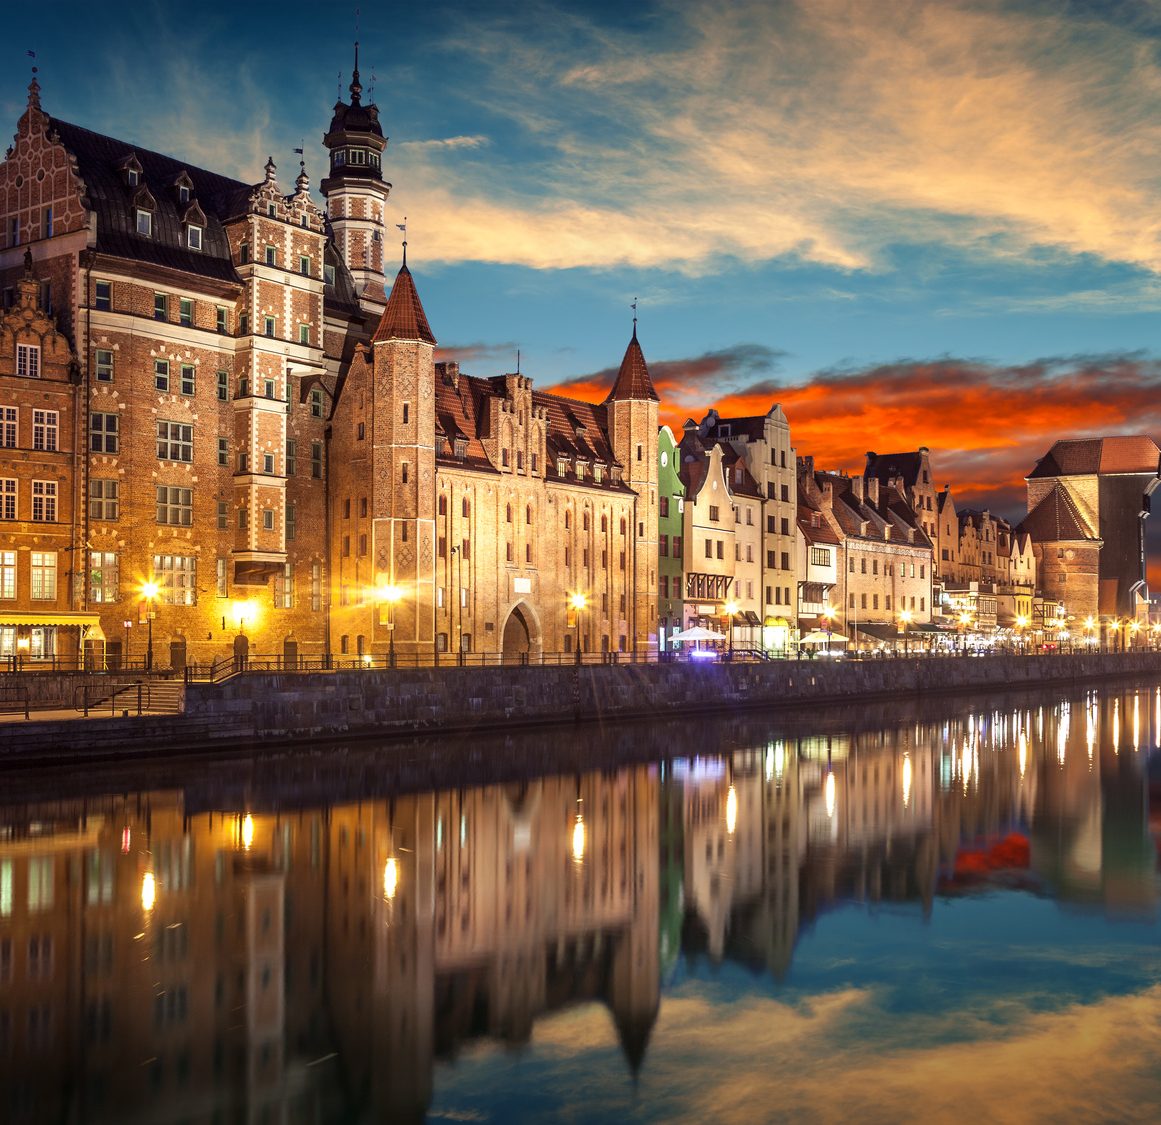 The riverside with the characteristic Crane of Gdansk, Poland.